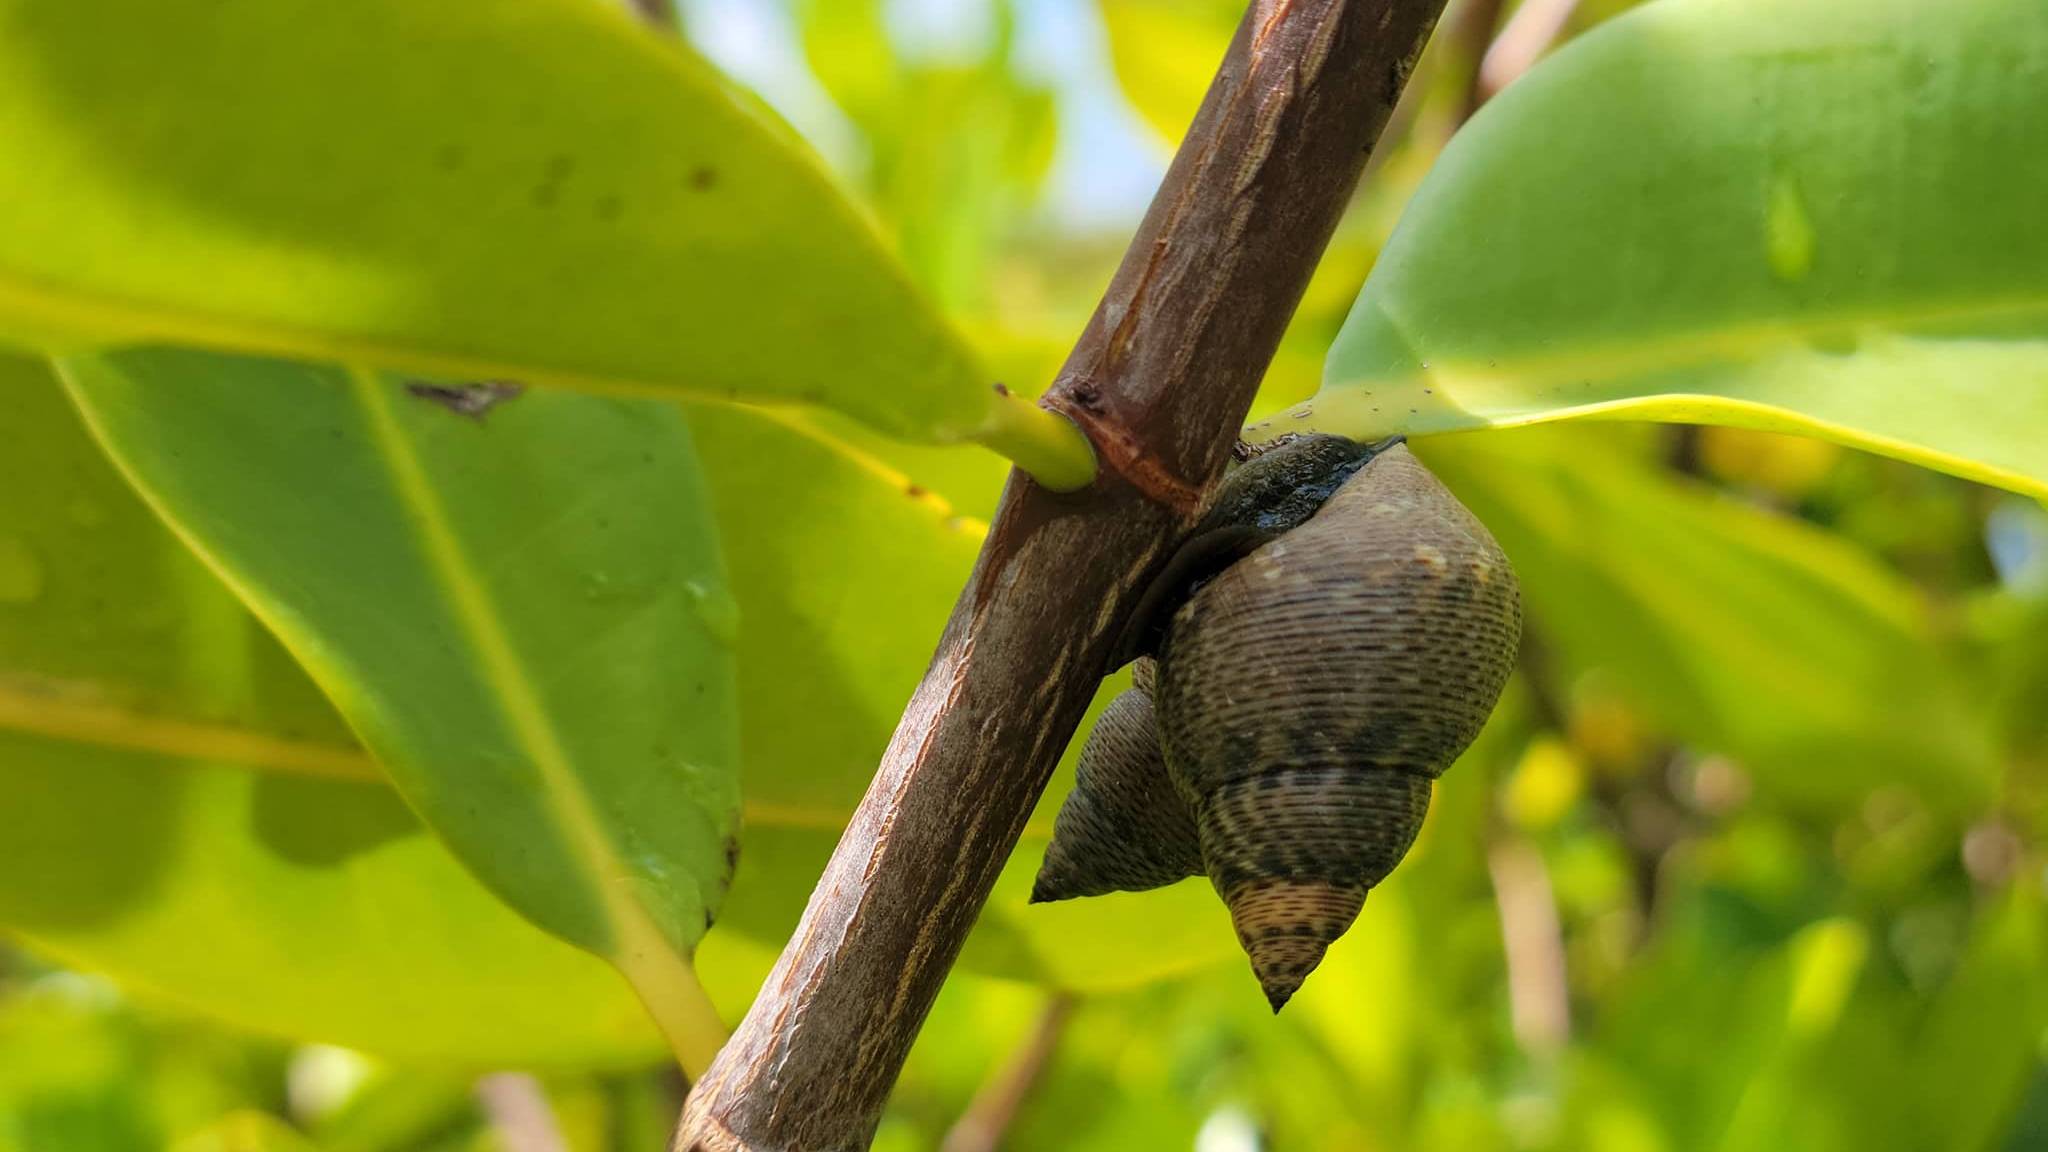 Snail resting on a red mangrove prop root 